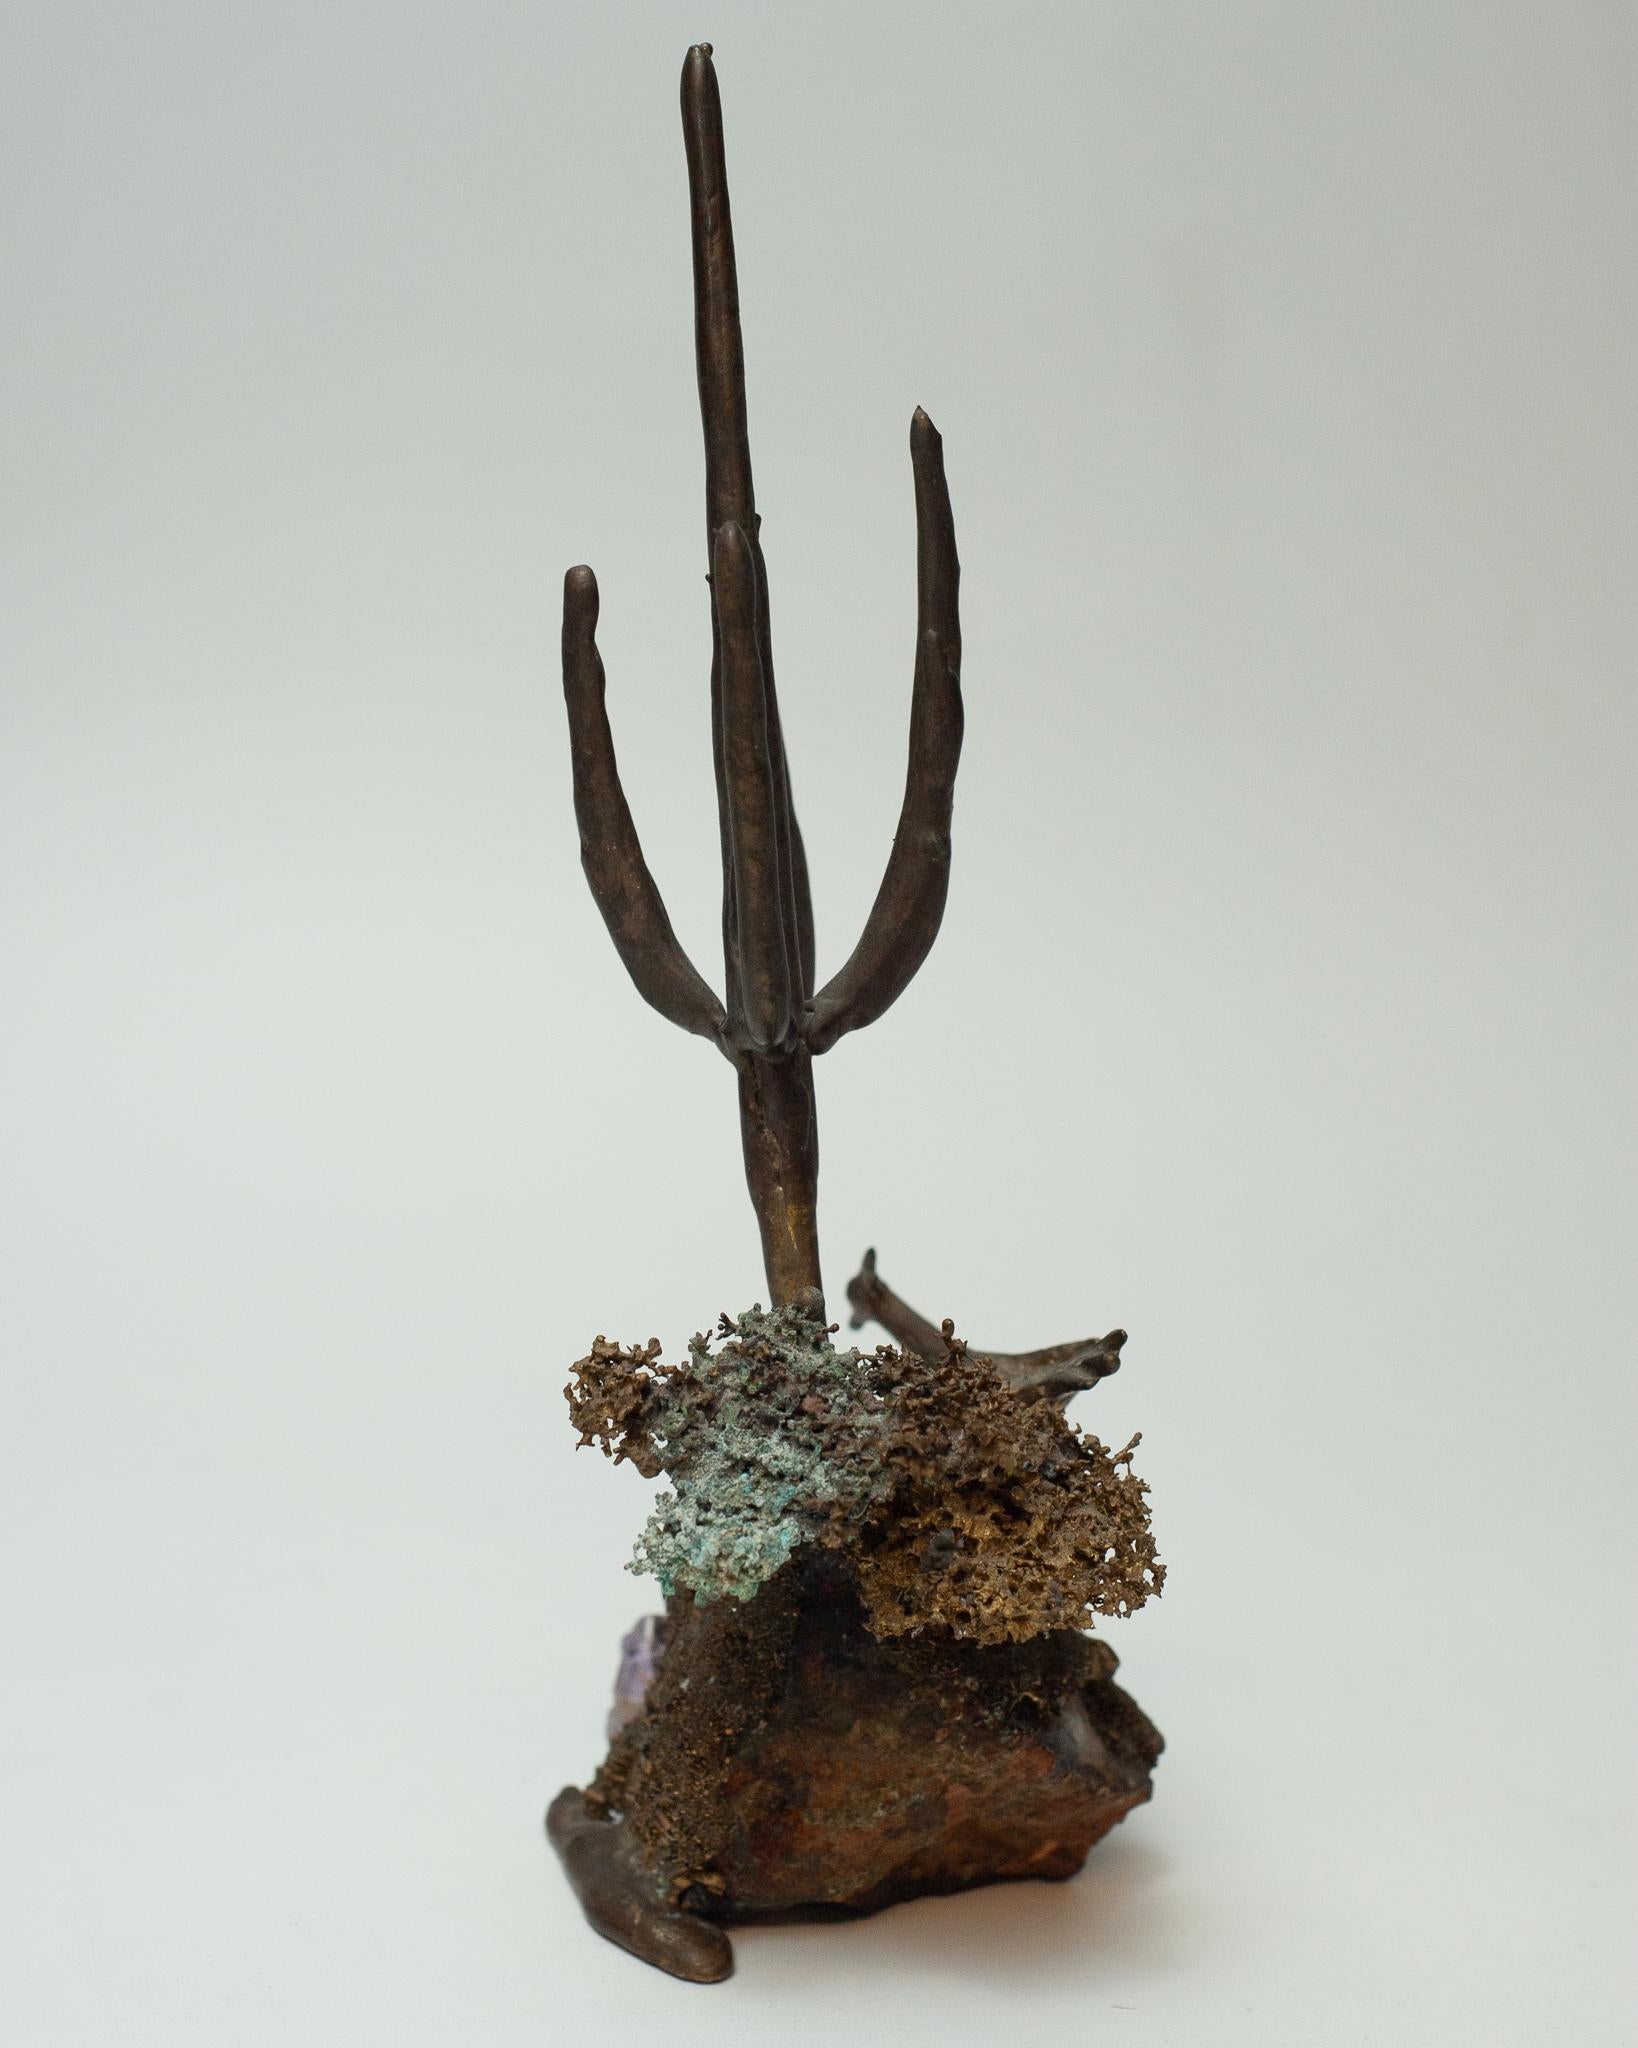 A unique bronze and amethyst sculpture in a truly Brutalist / organic style treatment with a fine, raw surface patina. Bird, textured brush and cactus motifs are abstracted in cast bronze on a center support of natural amethyst. This sculpture is